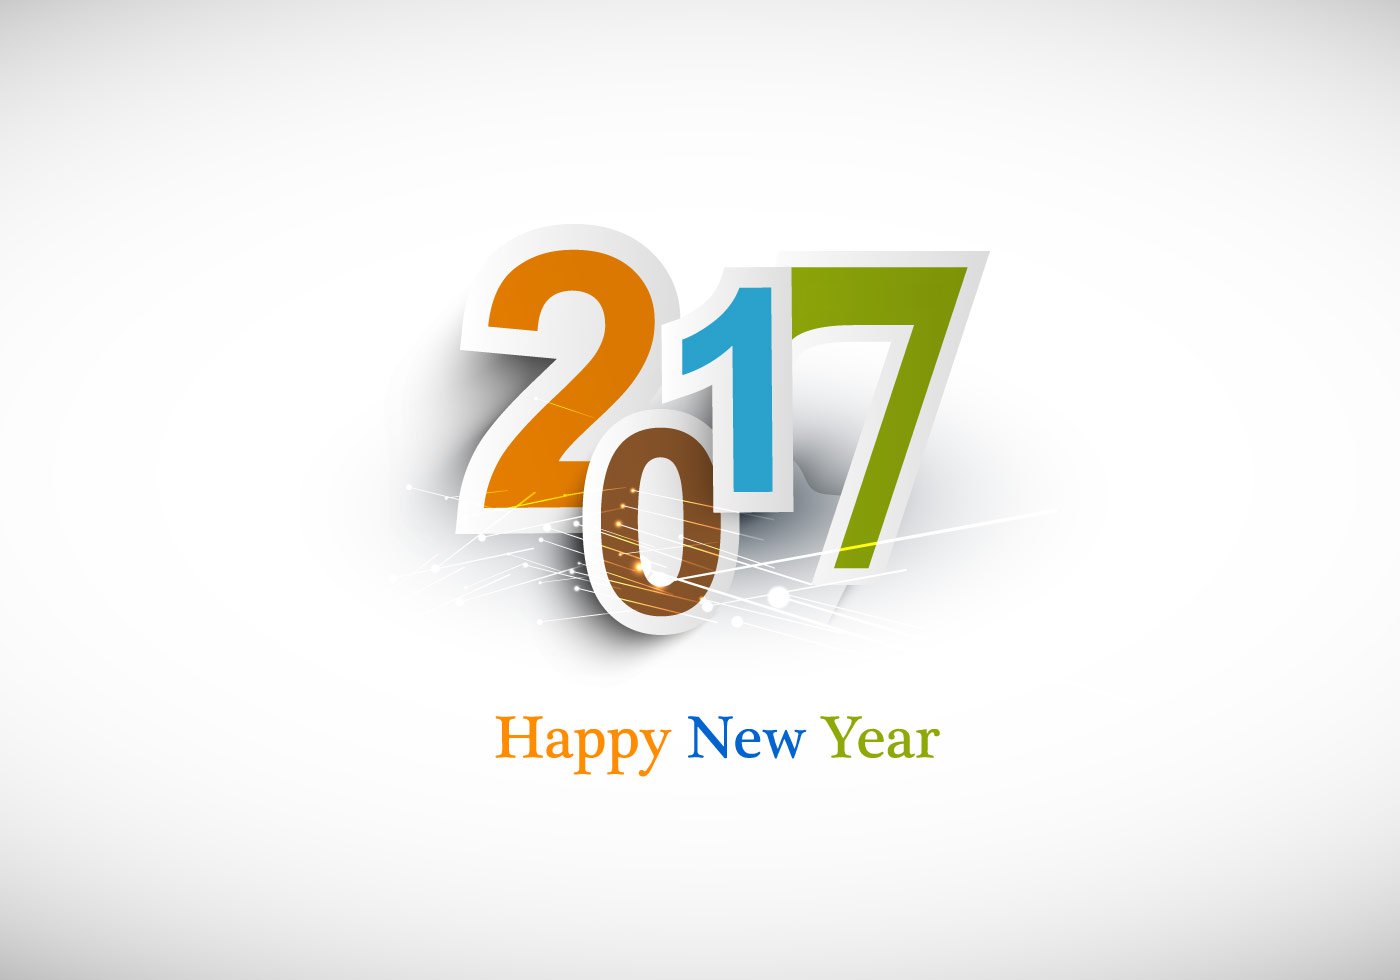 2017-happy-new-year-background-template-33.jpg (1400×980)